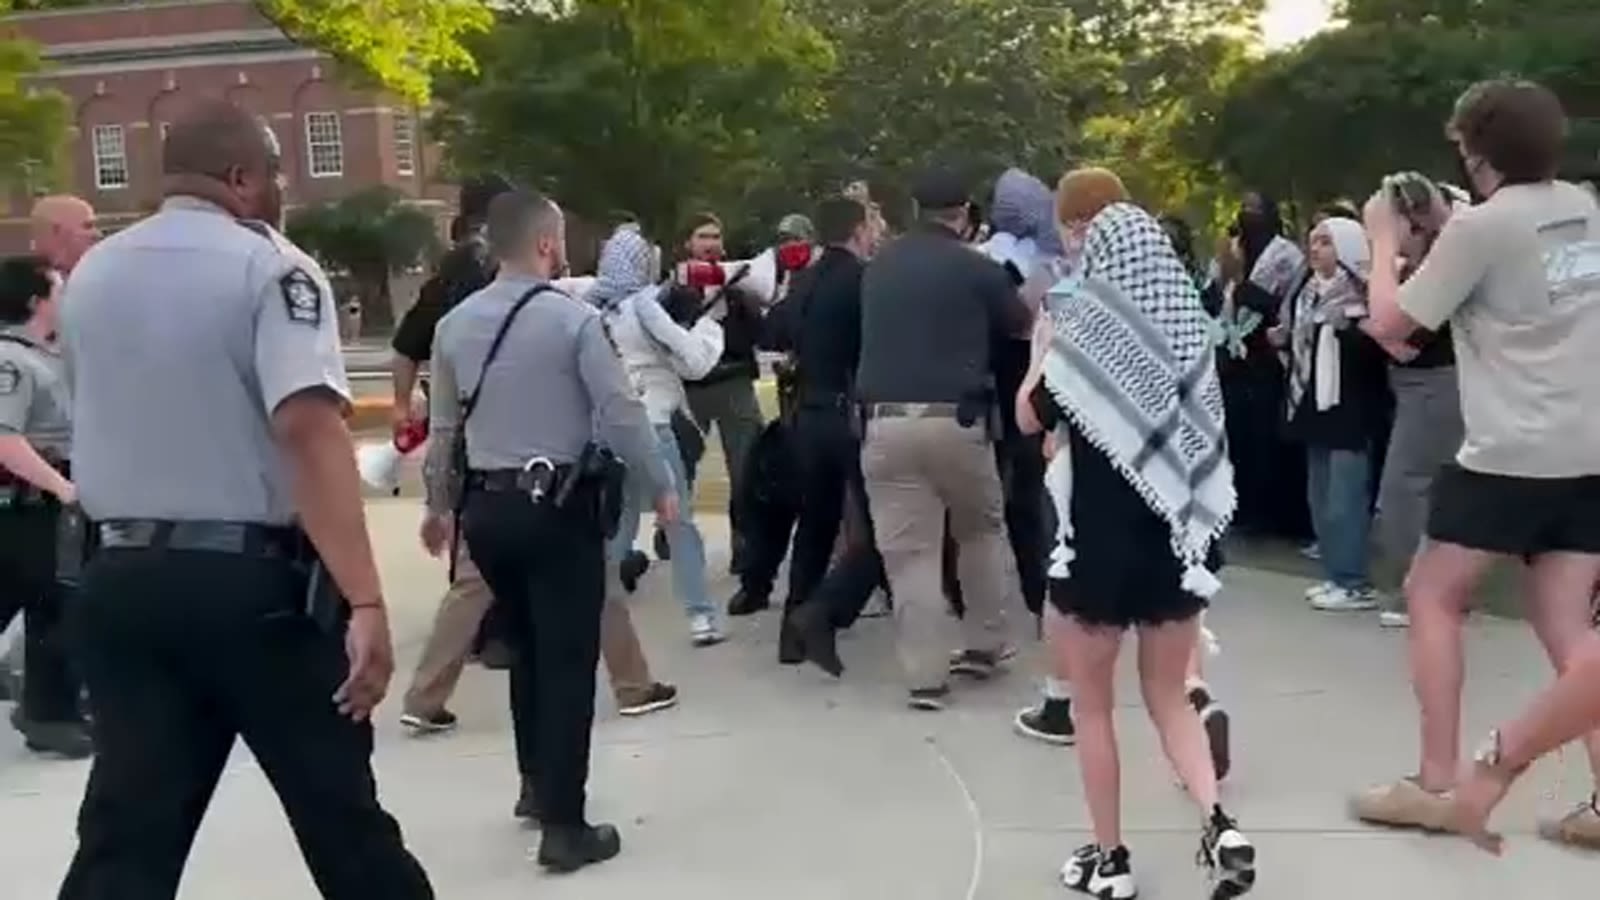 One demonstrator arrested at NC State during Palestinian protest